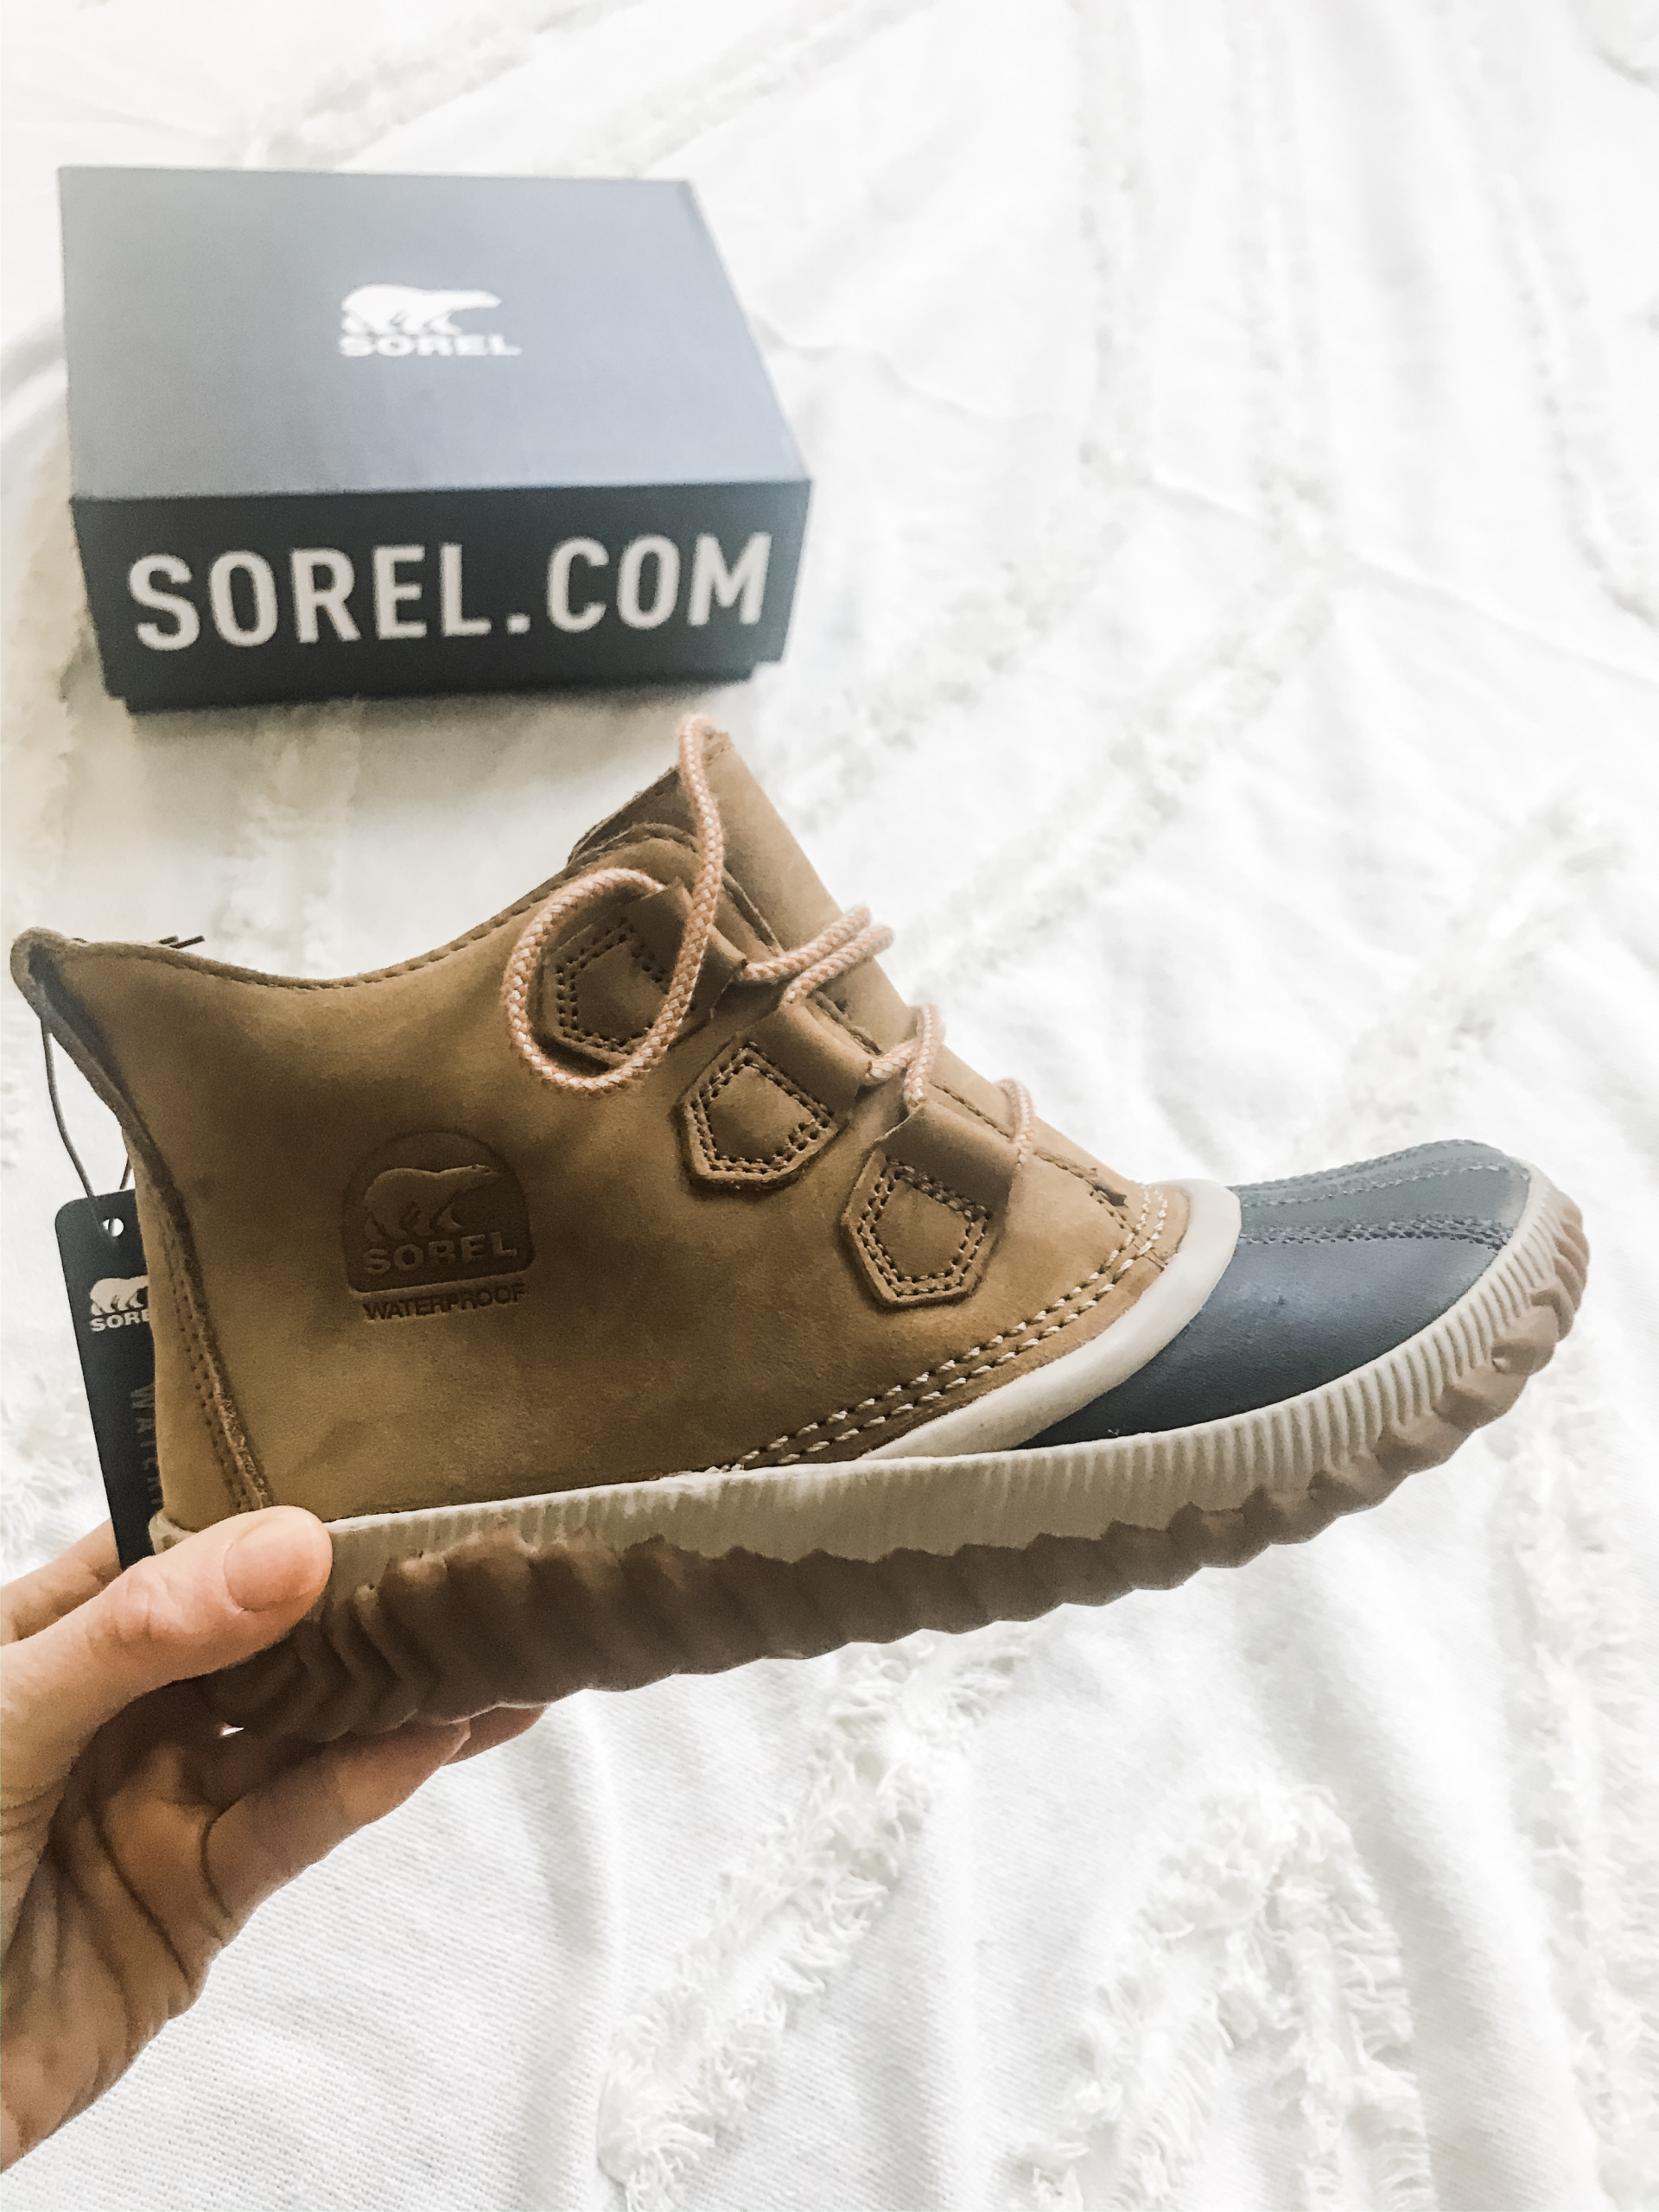 Sorel boots, favorite boots from 2019